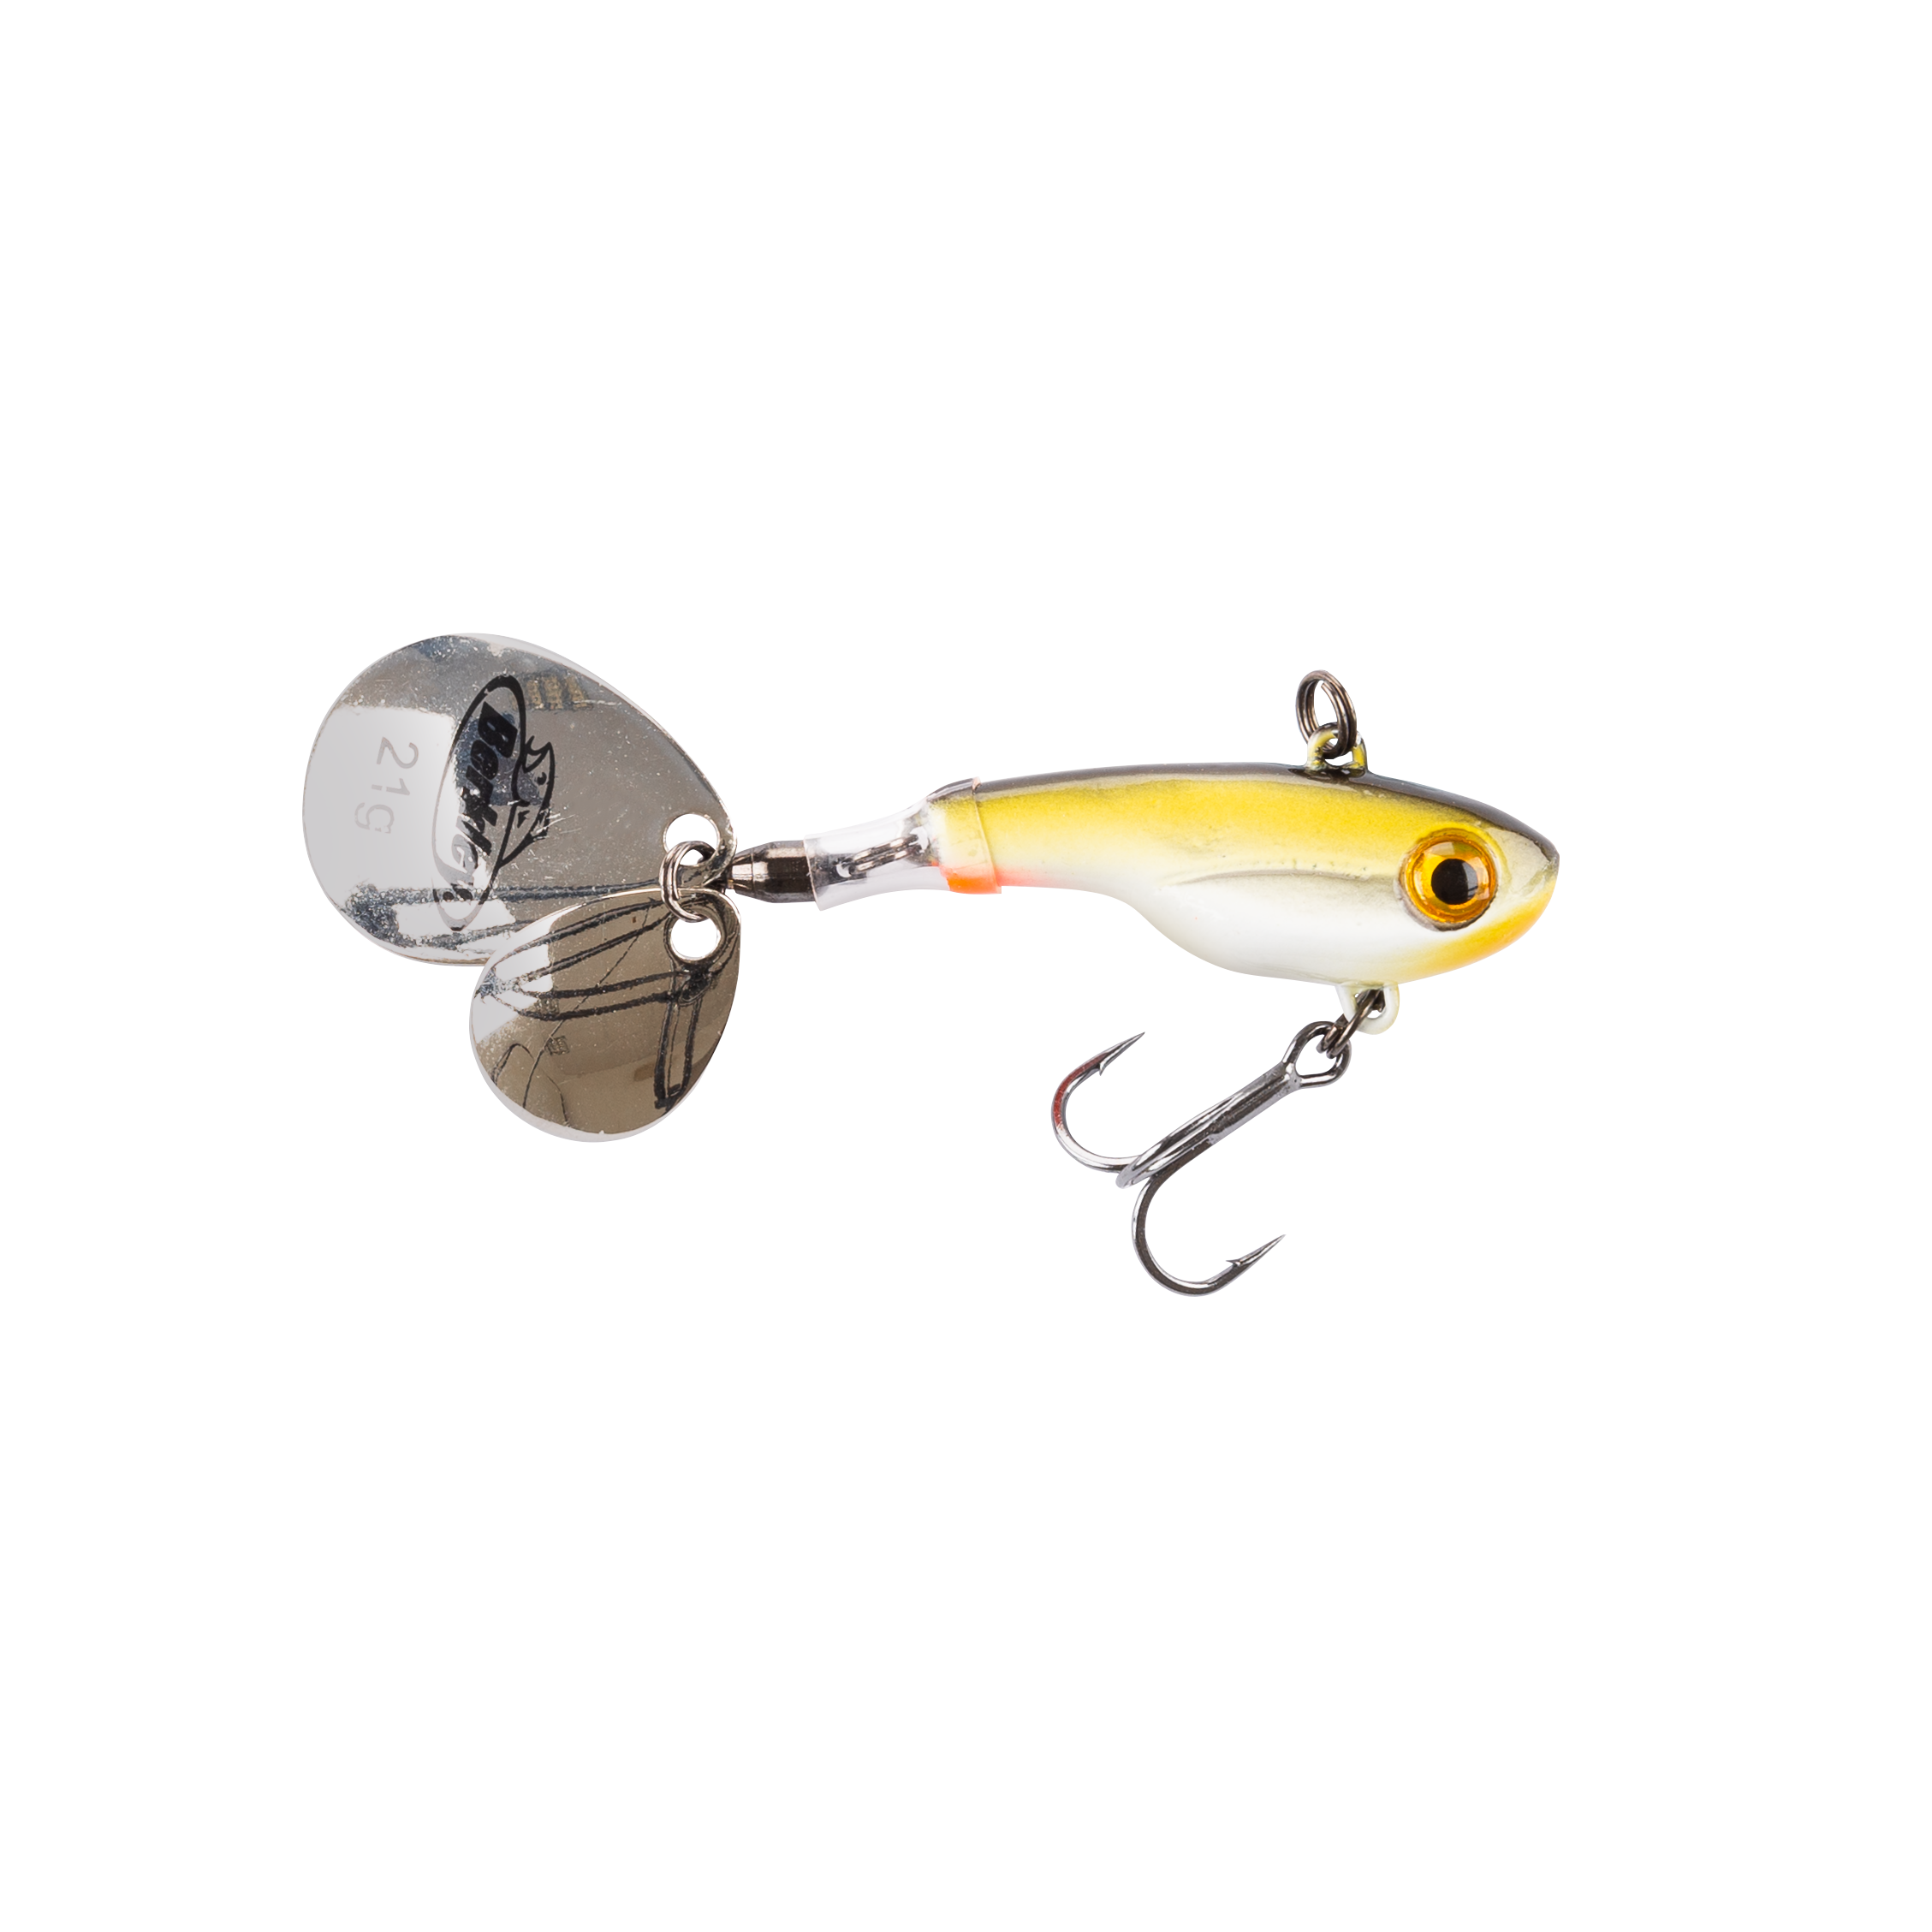 Fishing Spinner Spoon Lures Rotatable Inline Bass Trout Fishing Tackle Baits 7CM-8.3G Spinners,Spinnerbaits,Blade Spinner Baits LENPABY 5PCS feather Jigs Fishing hooks,Rooster Tail 